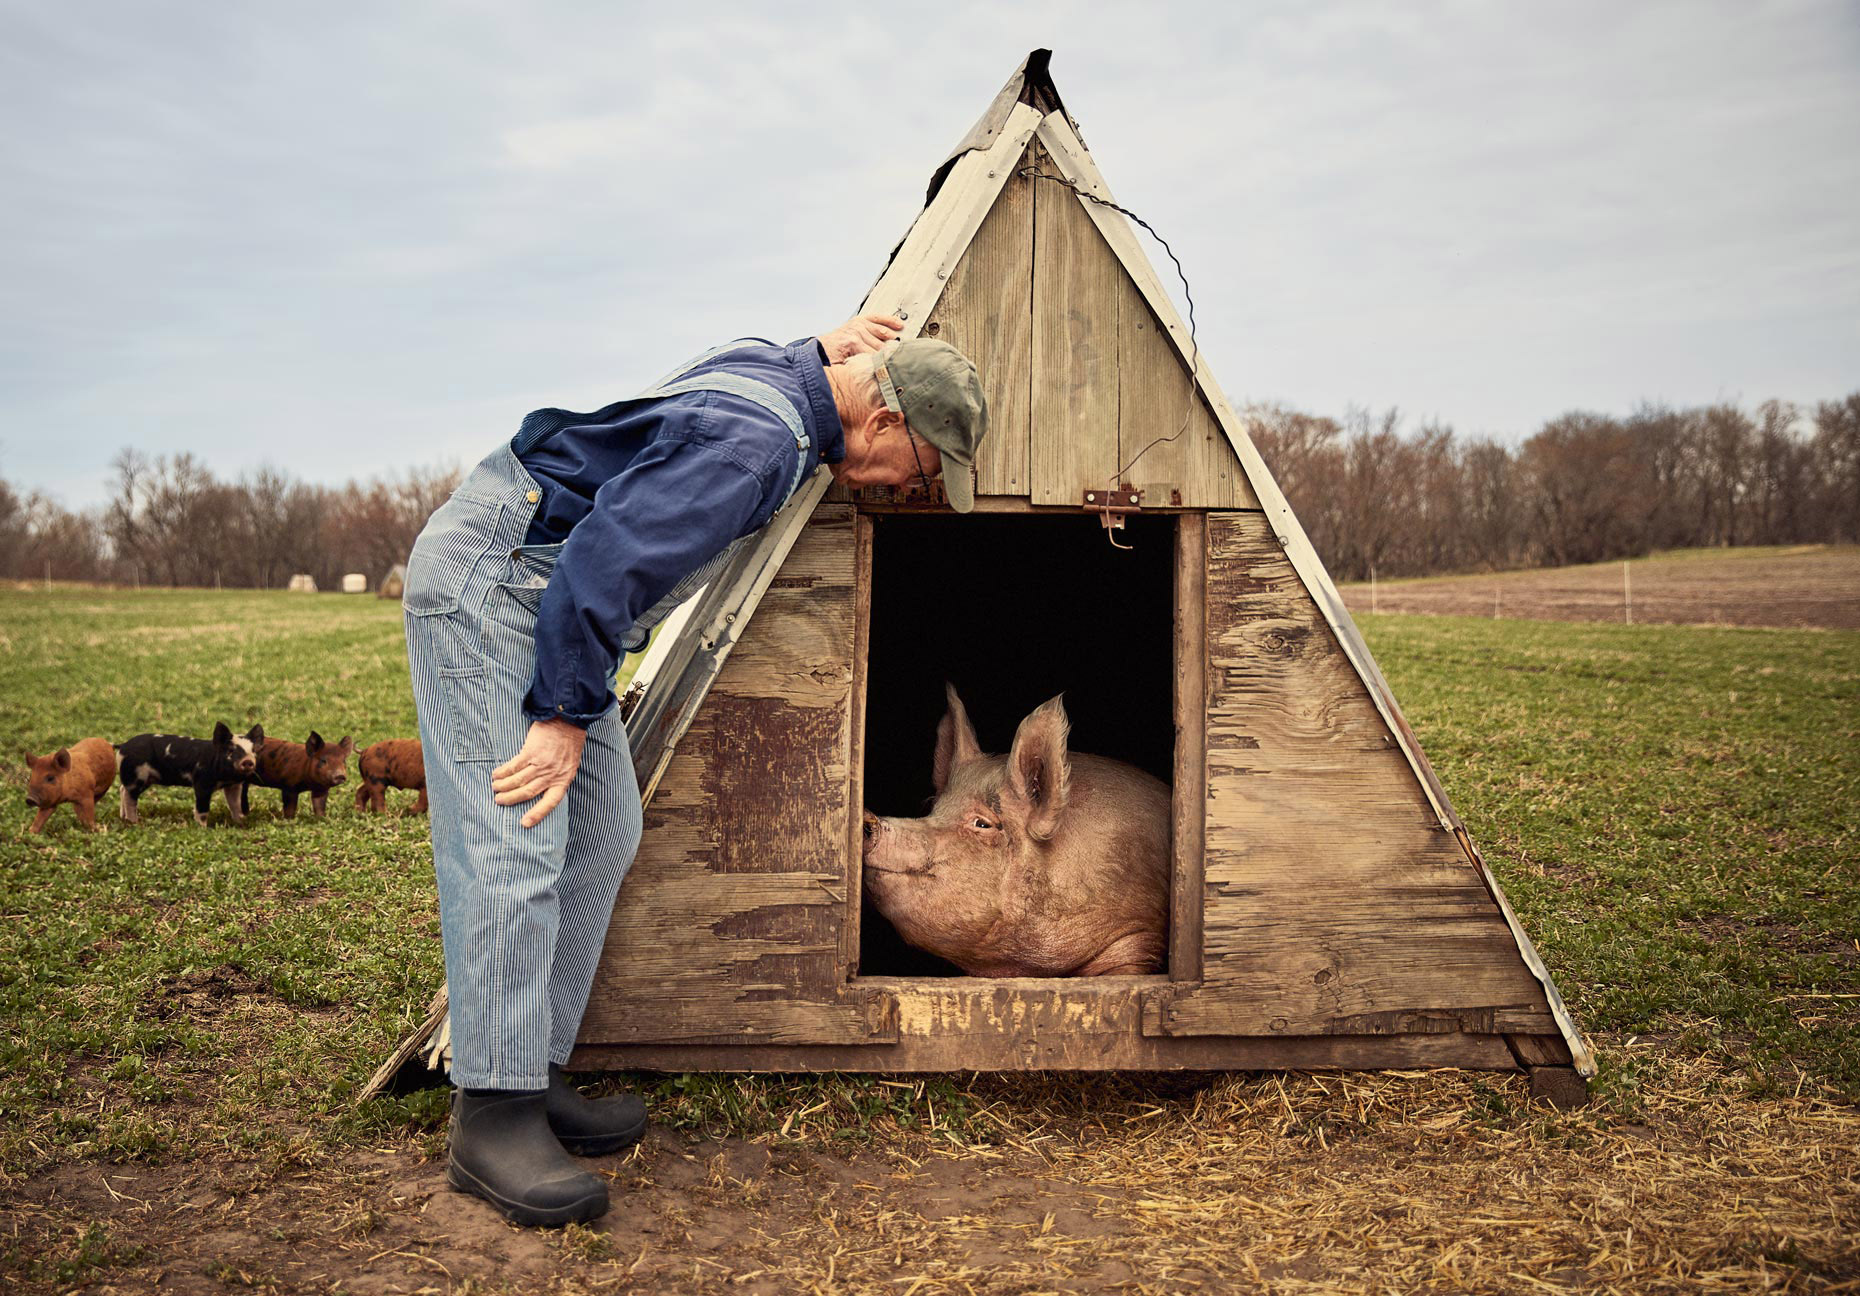 Pig farmer checking on a sow | lifestyle photography by Saverio Truglia